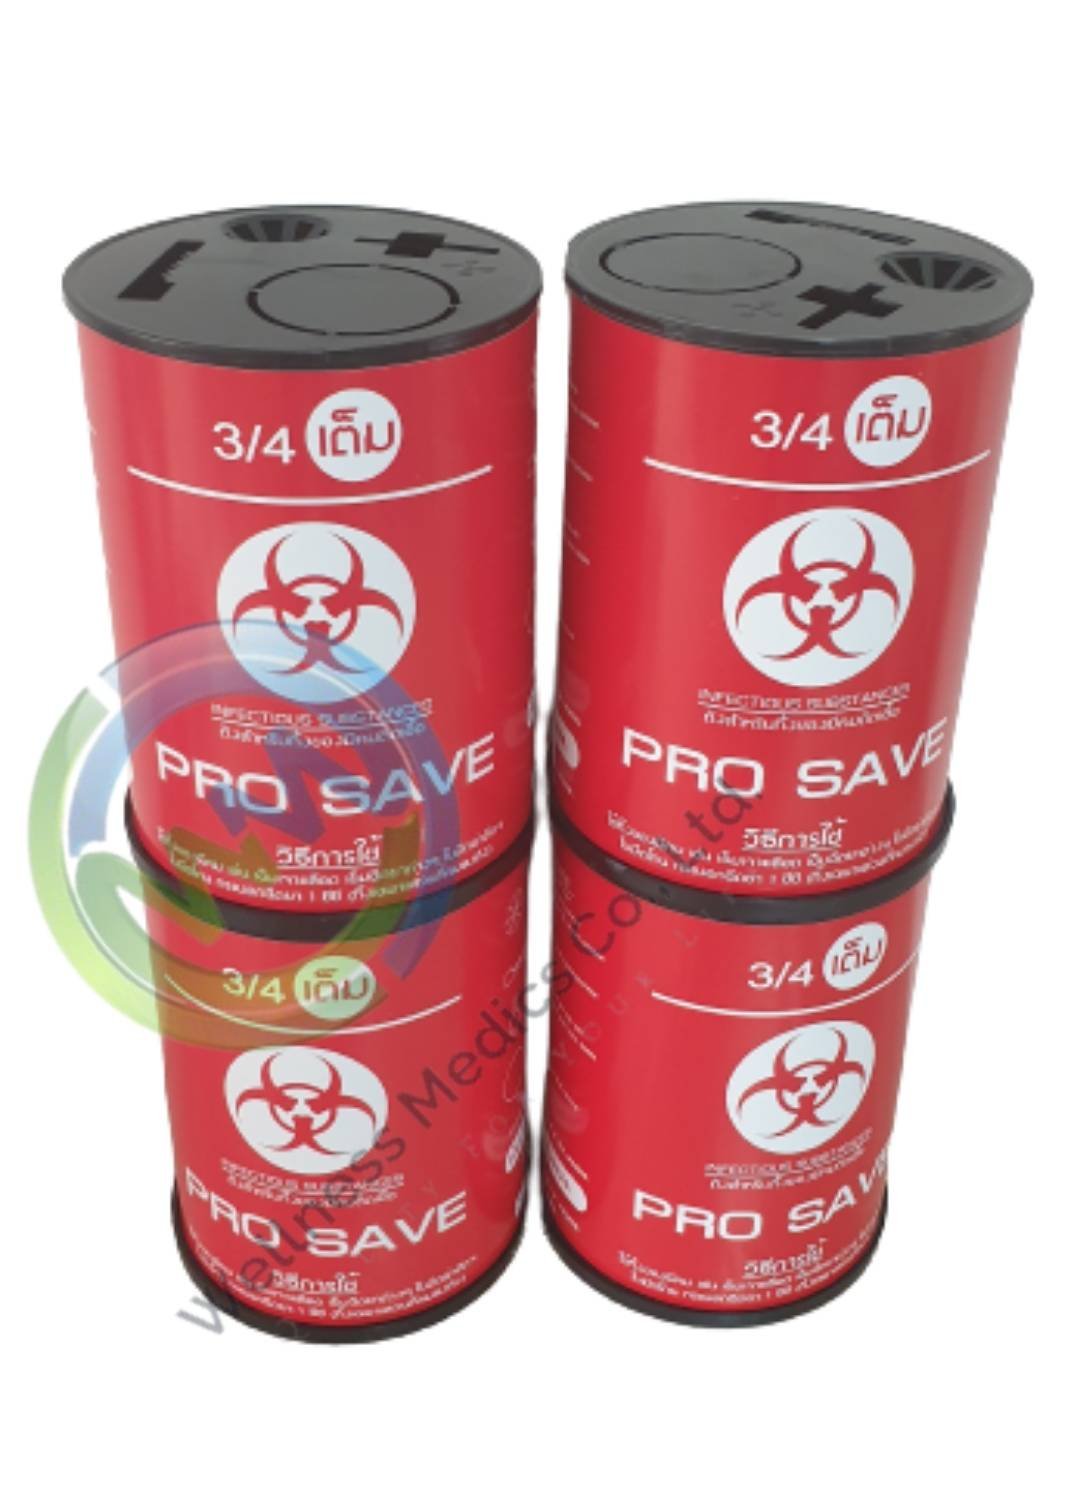 Red cans for discarding sharp objects: round and size 2.25 (pieces)